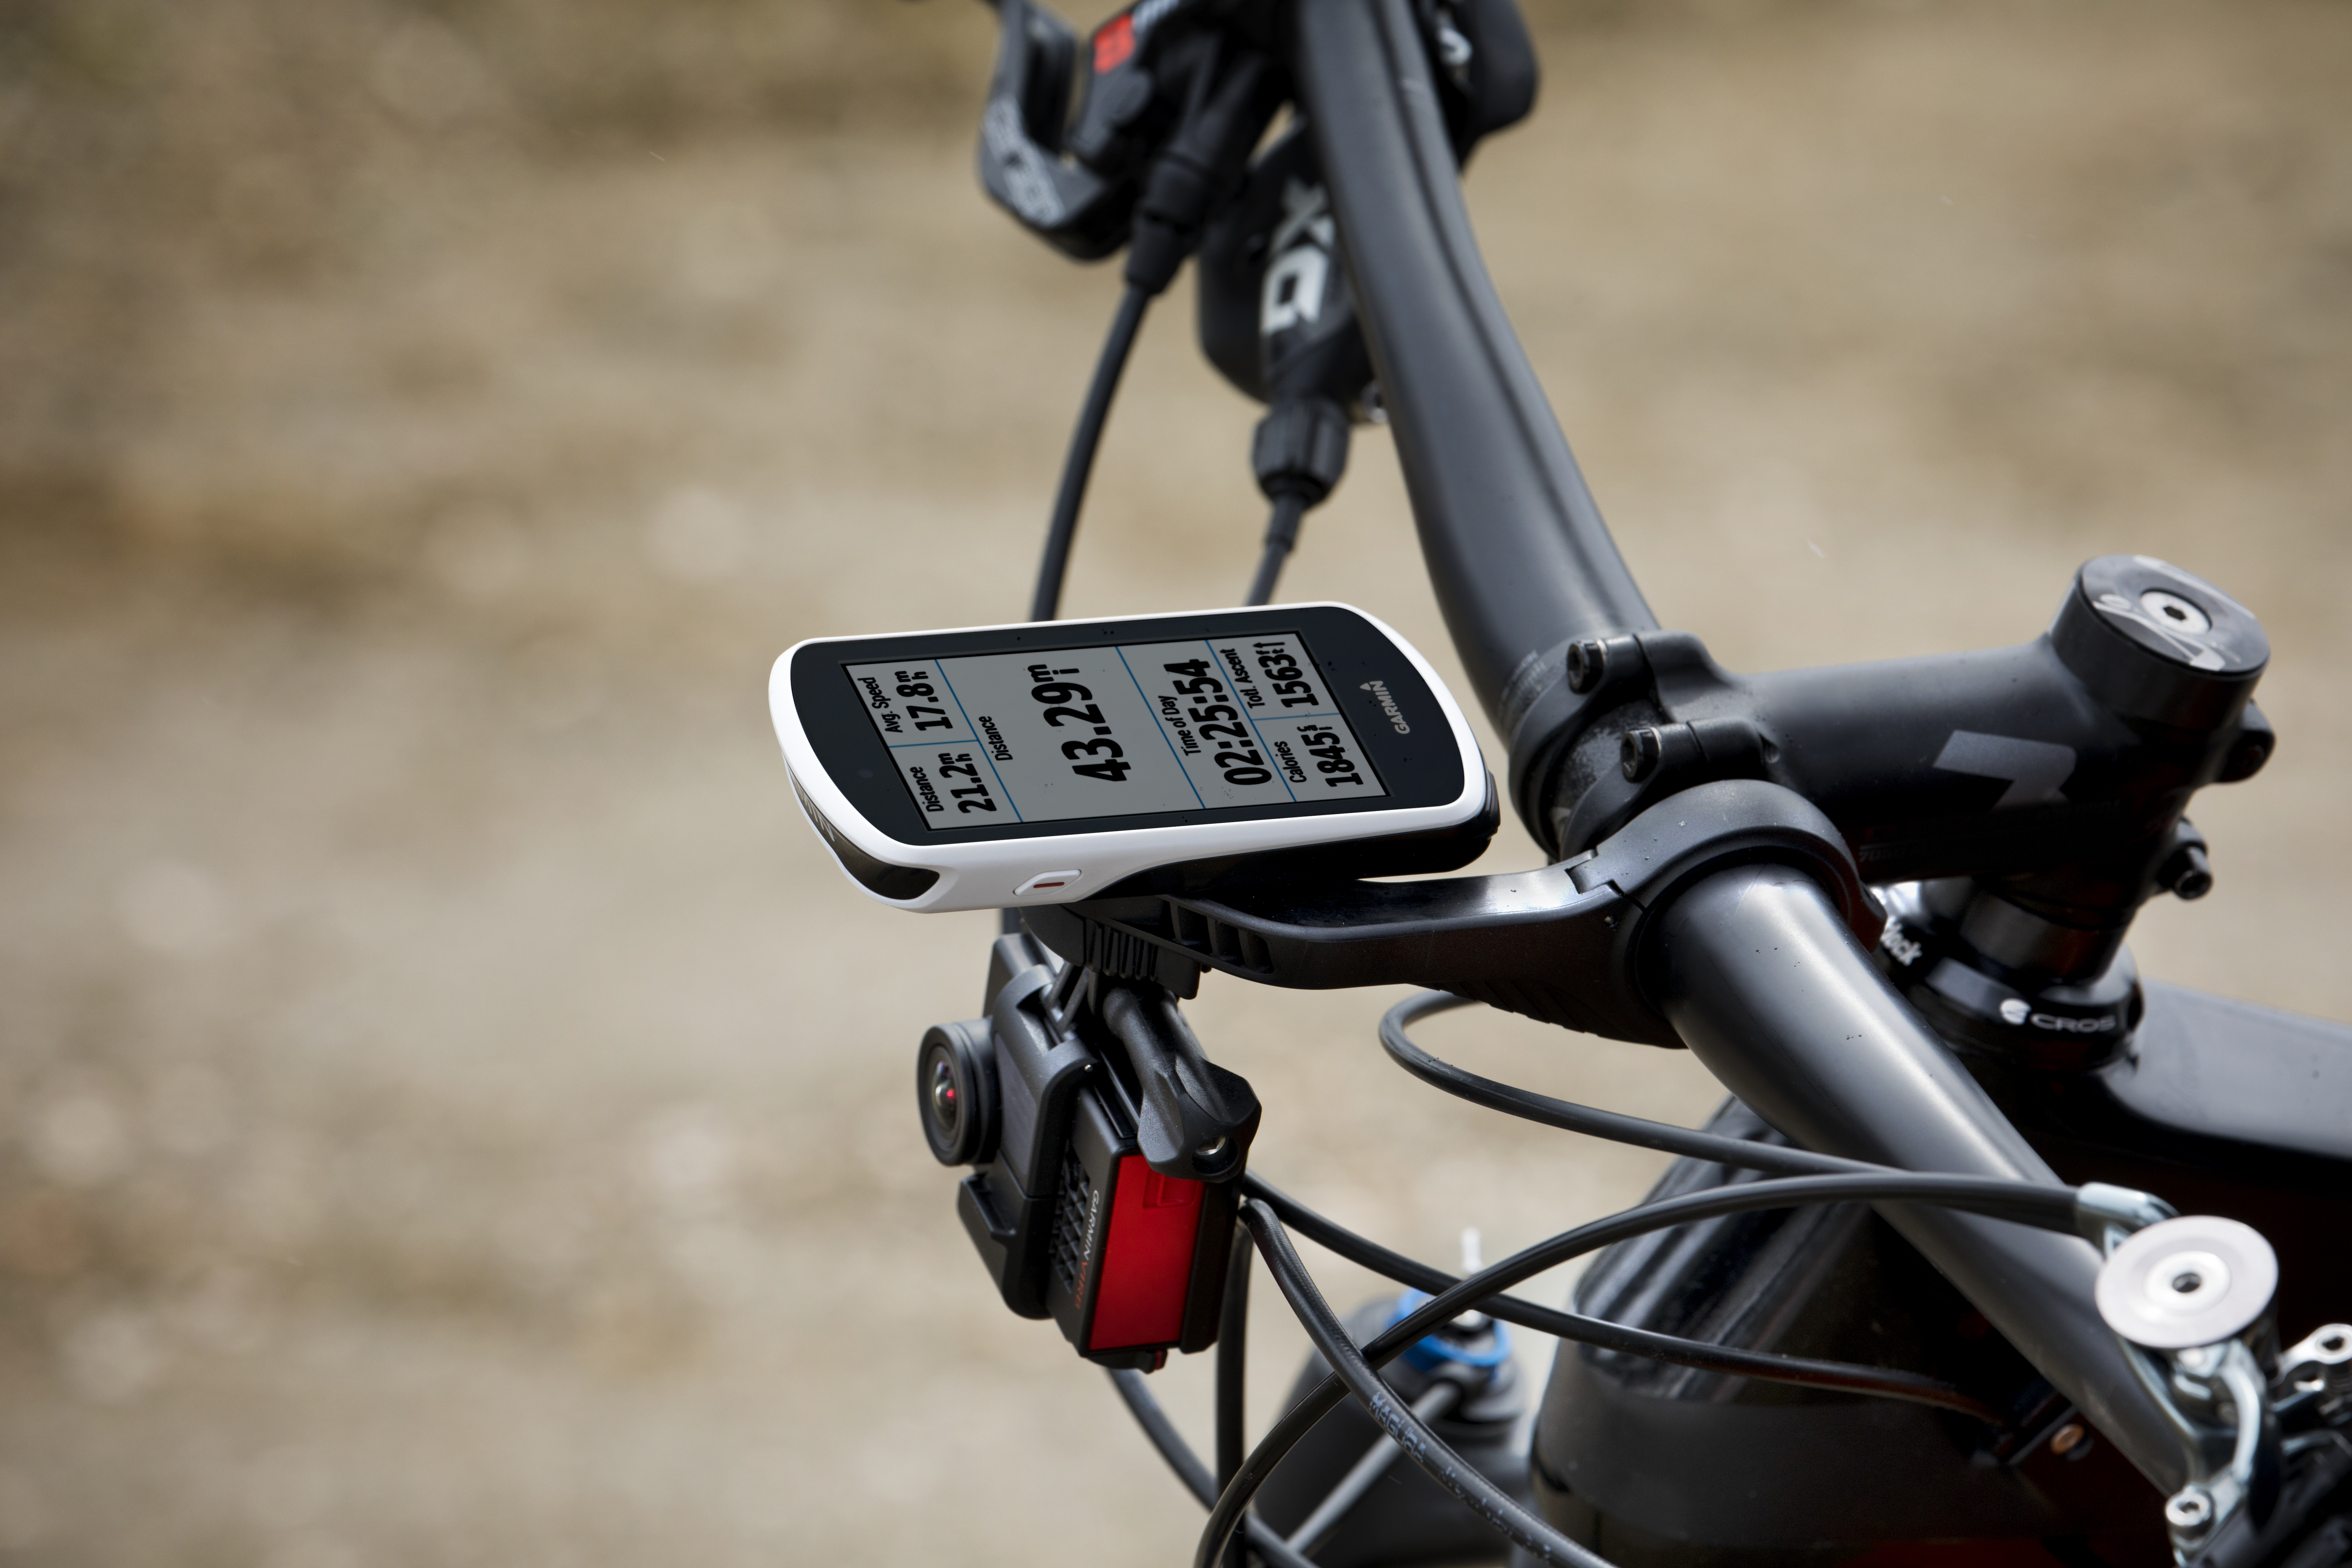 Enhance your ride with the new Edge 1030